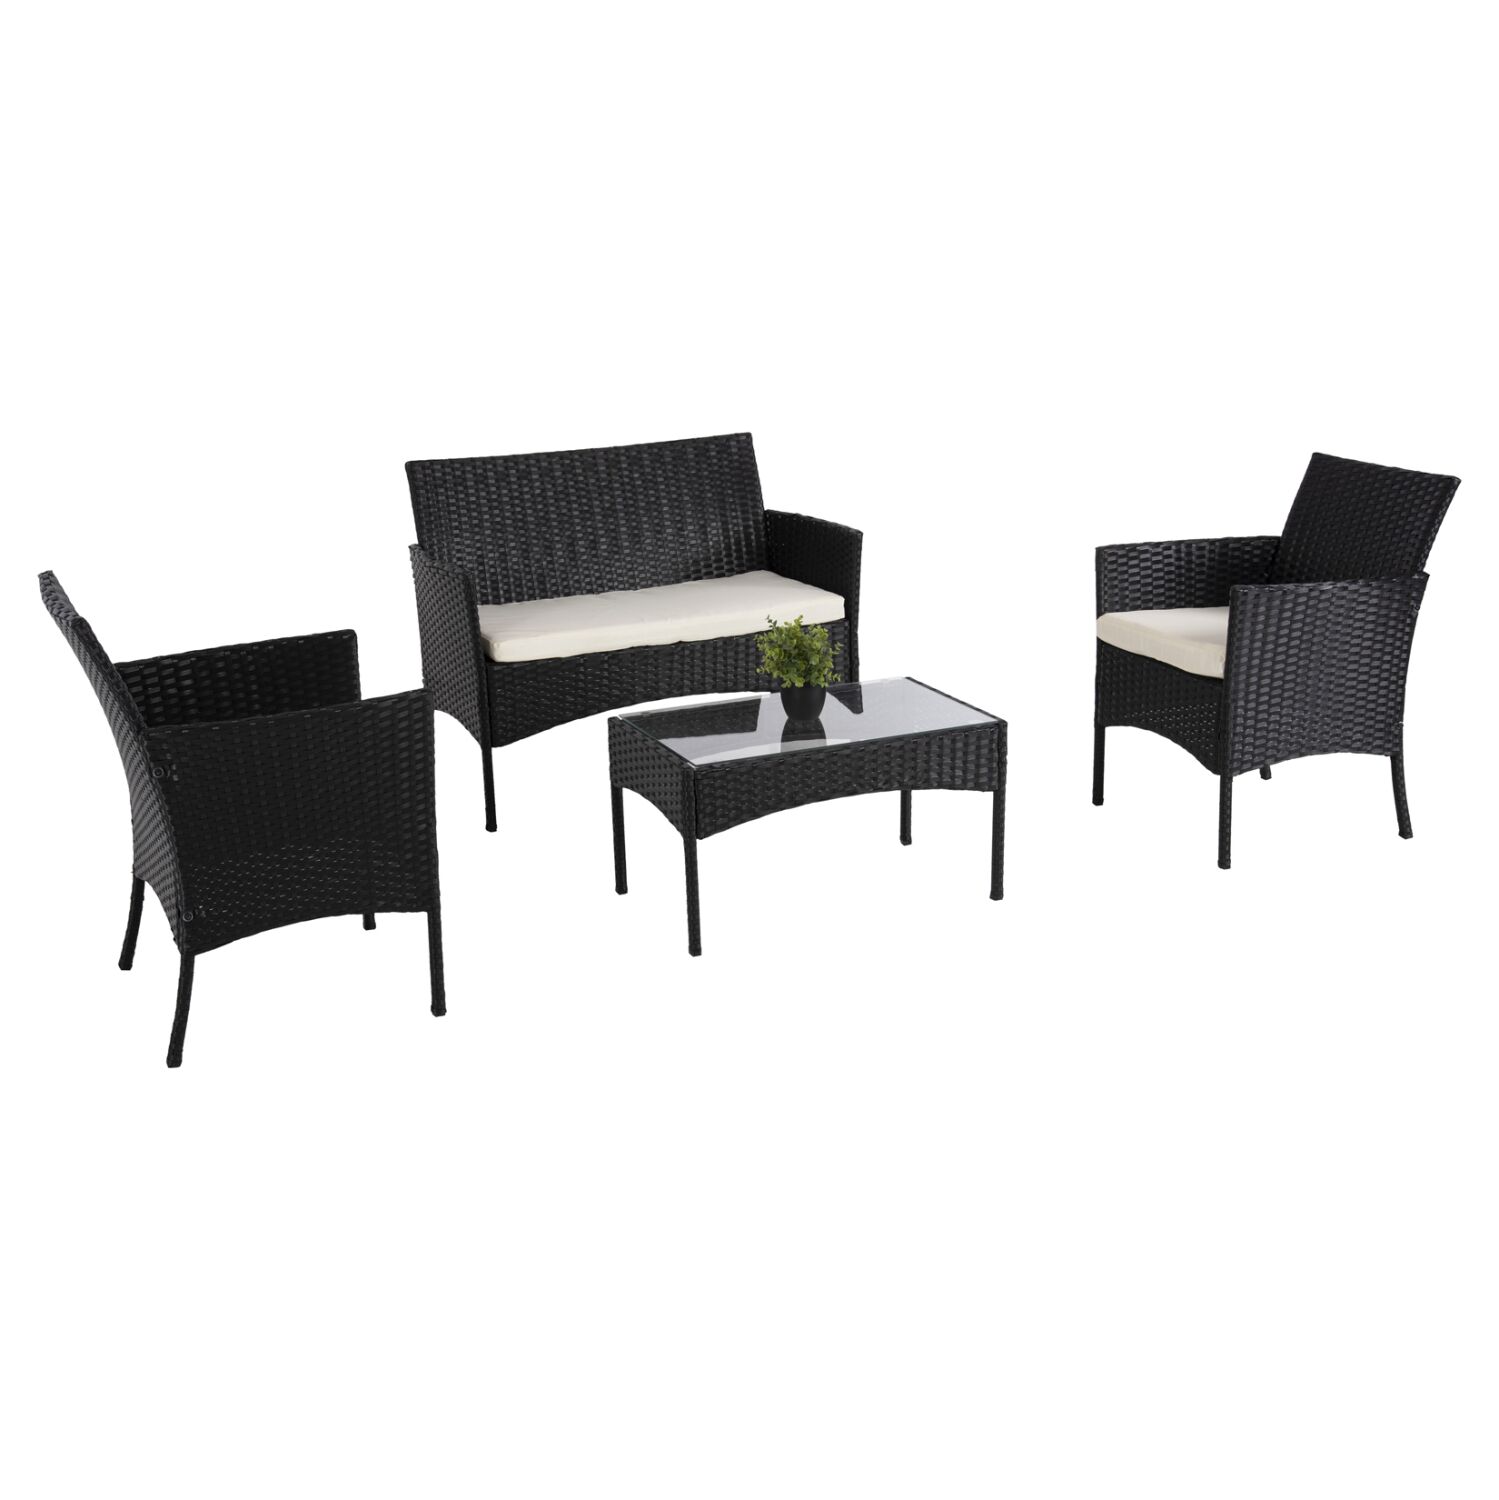 set saloni 4tmch fb9608904 synthrattan m Outdoor Lounge Set 4pcs Stasia Hm6089.04 Synthetic Rattan In Black-cushions In Beige